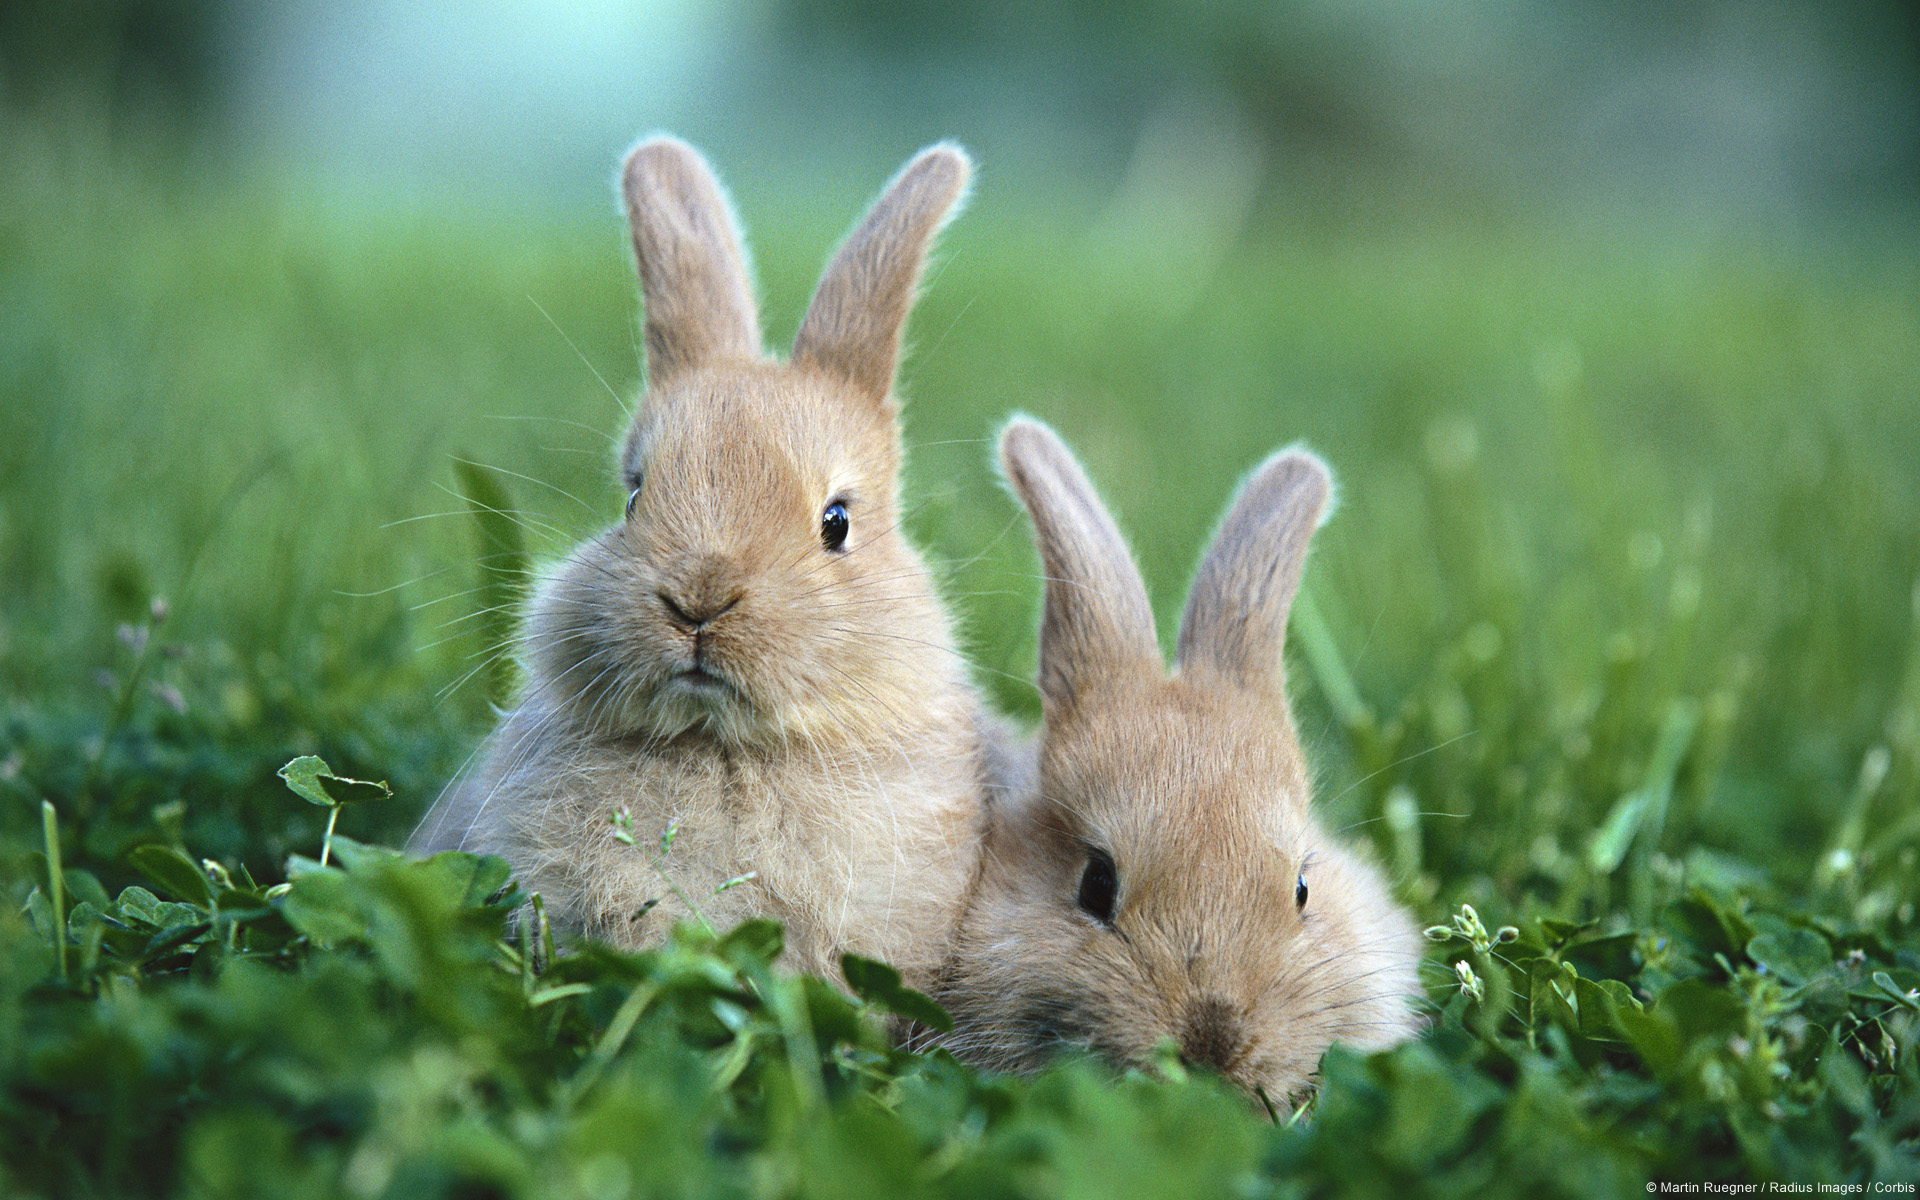 Cute Baby Rabbits Wallpaper HD Background Image